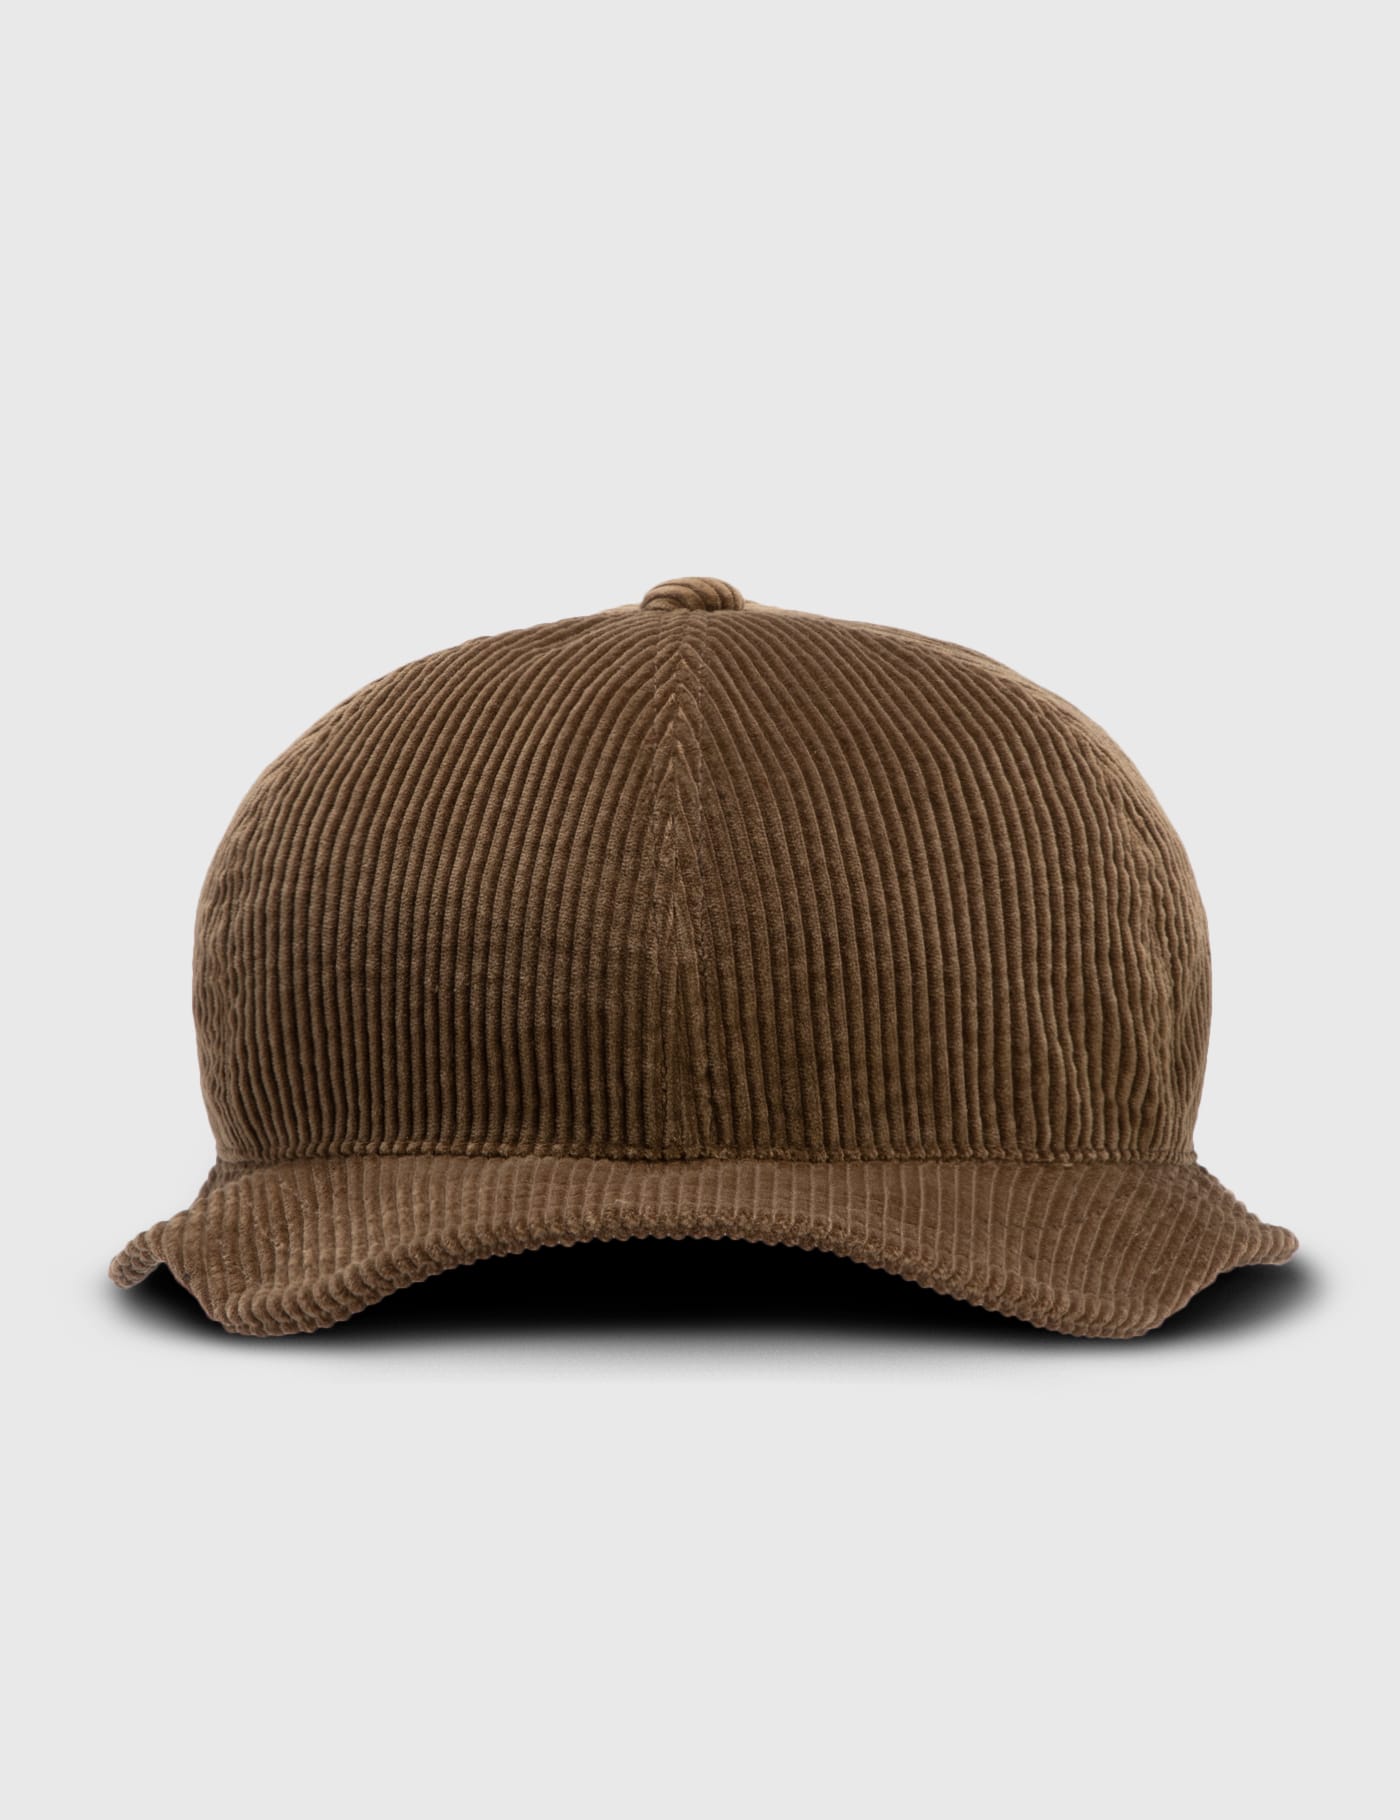 TIGHTBOOTH - CORD HELMET CAP | HBX - Globally Curated Fashion and 